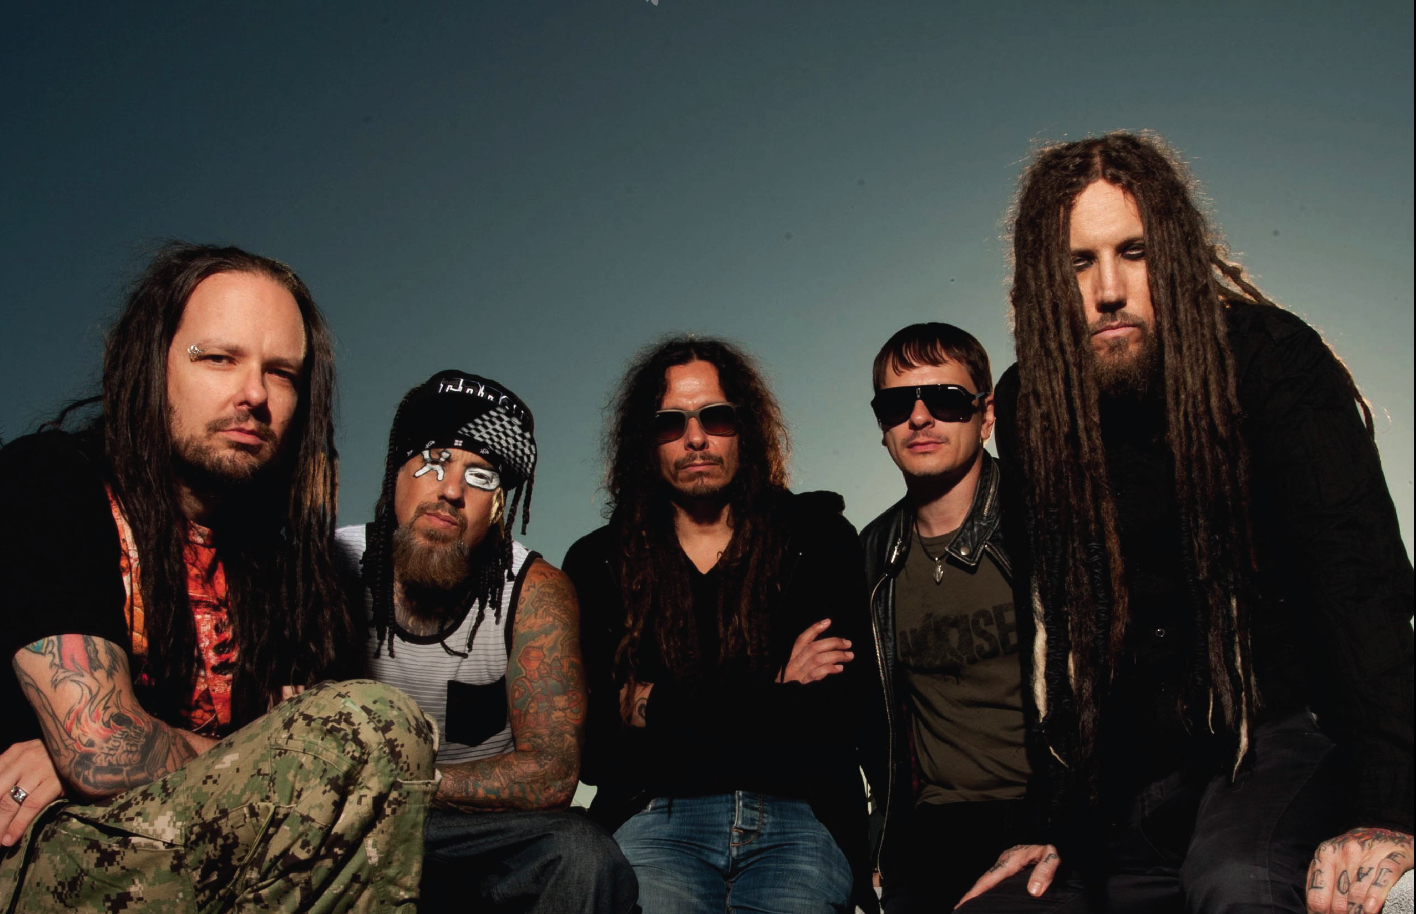 Korn wallpapers, Music, HQ Korn pictures 4K Wallpapers 2019